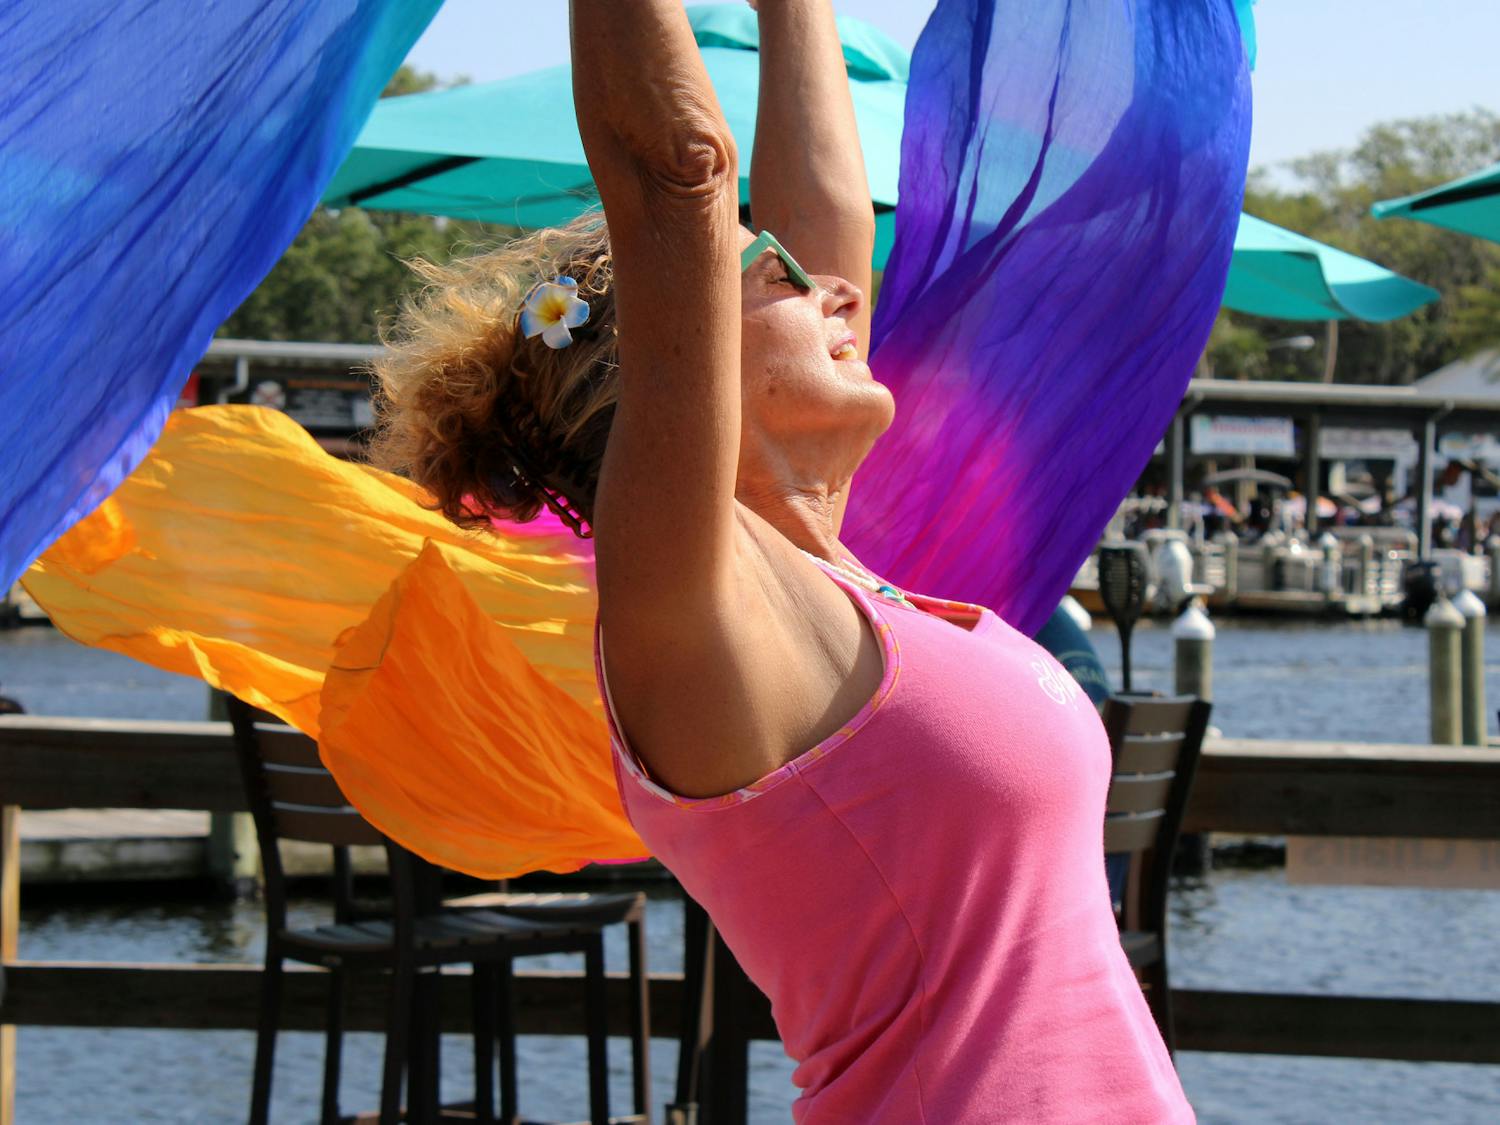 Elaine Hargrove, a 63-year-old Chiefland, Florida, resident, dances with colorful scarves at Crump’s Landing restaurant in Homosassa, Fla., on Sunday, April 16, 2023.